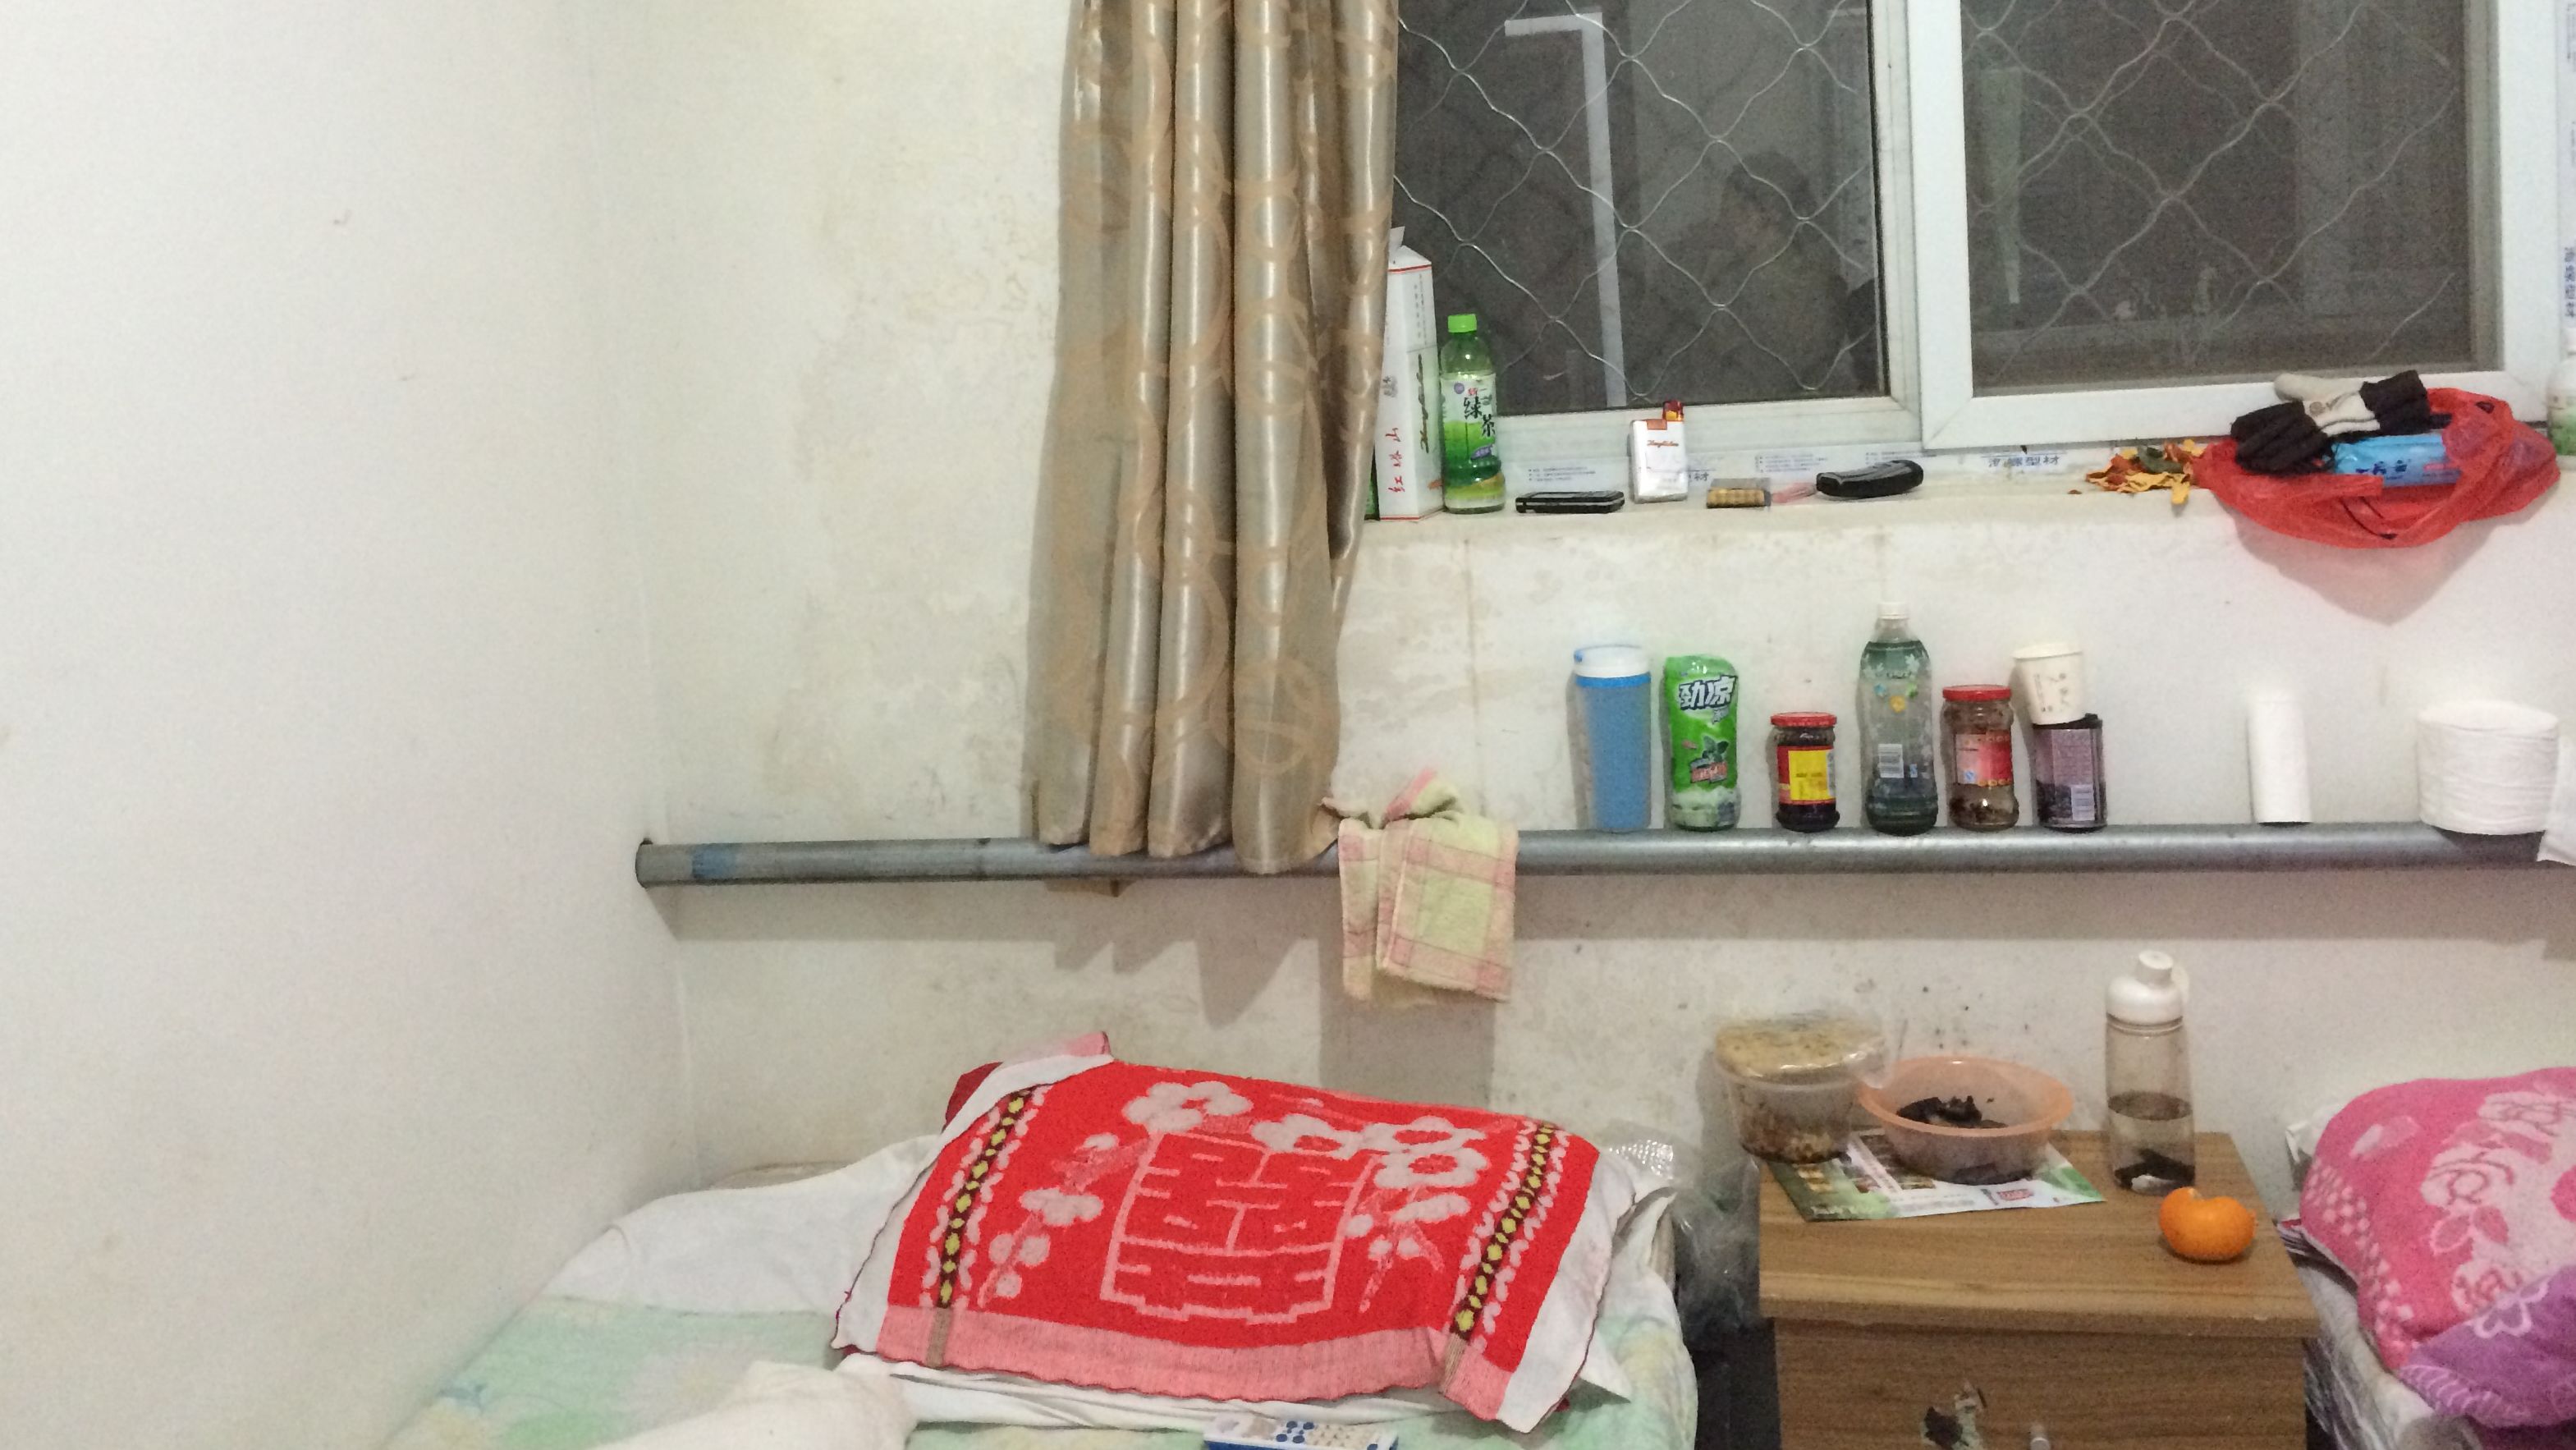 Liu Dajiang and his wife, who has cervical cancer, have stayed in this room while she undergoes treatment at a nearby hospital.